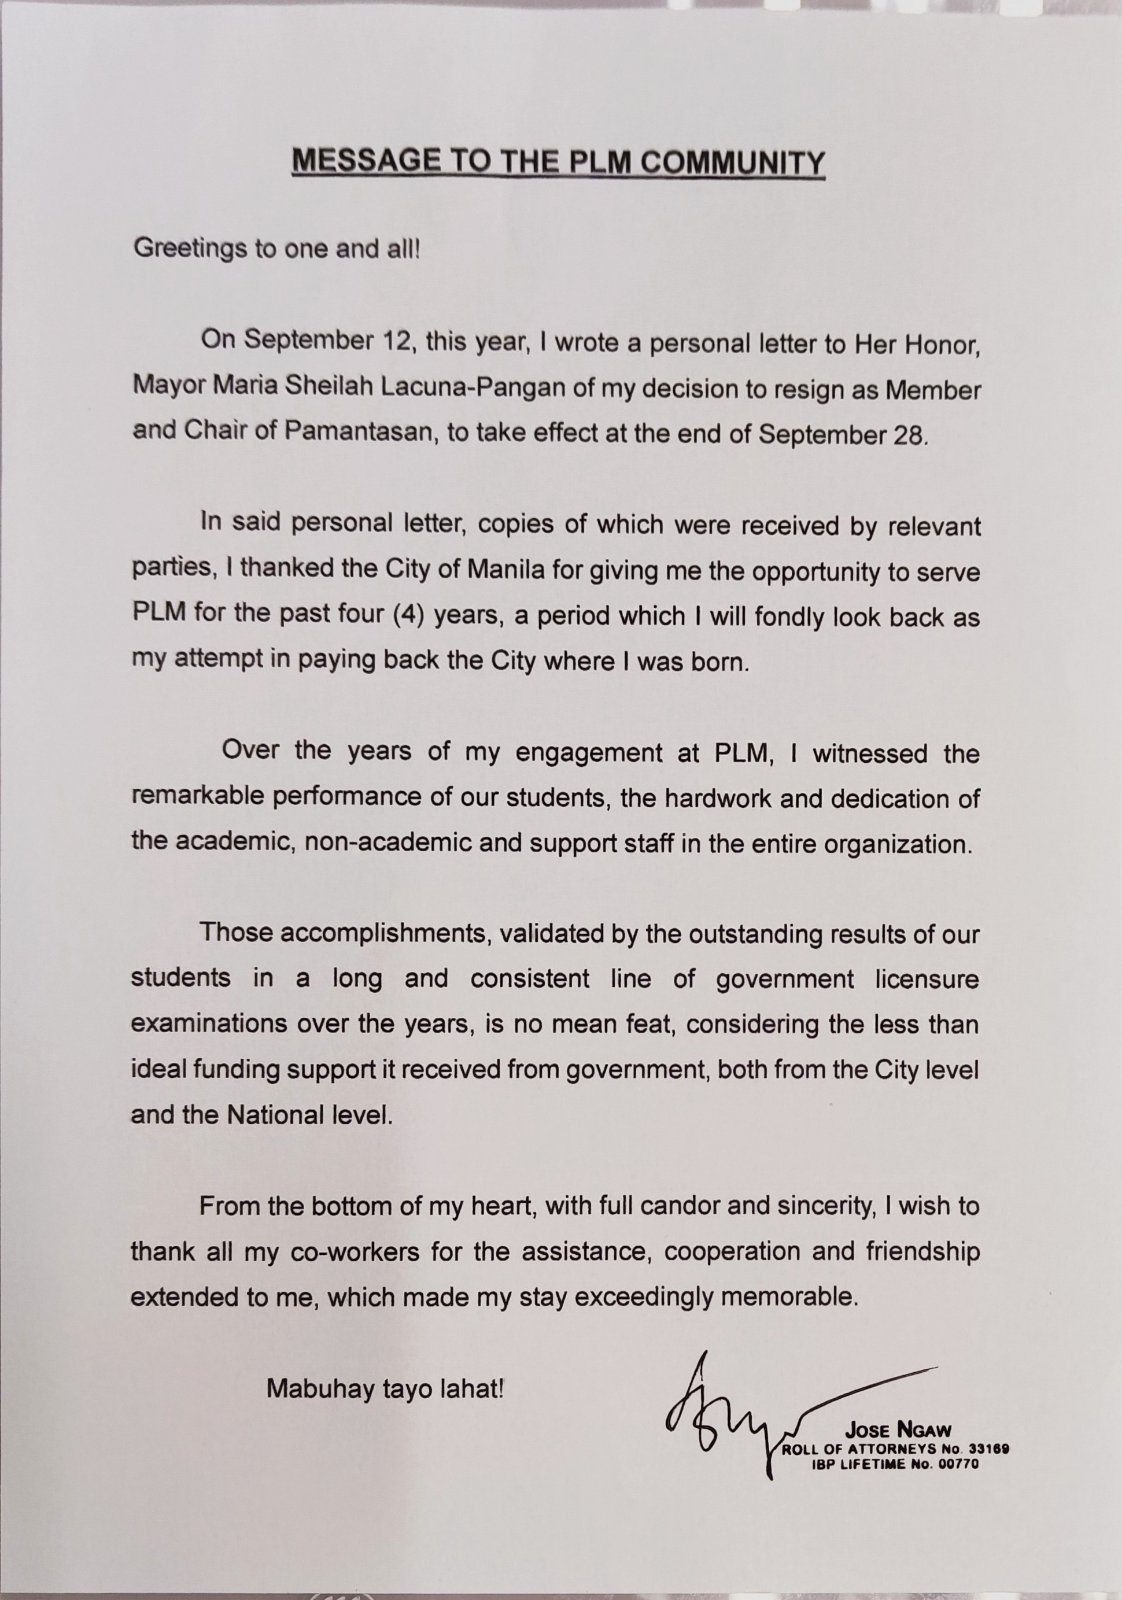 PLM Board of Regents Chairman, Atty. Jose Ngaw's, message to the PLM Community